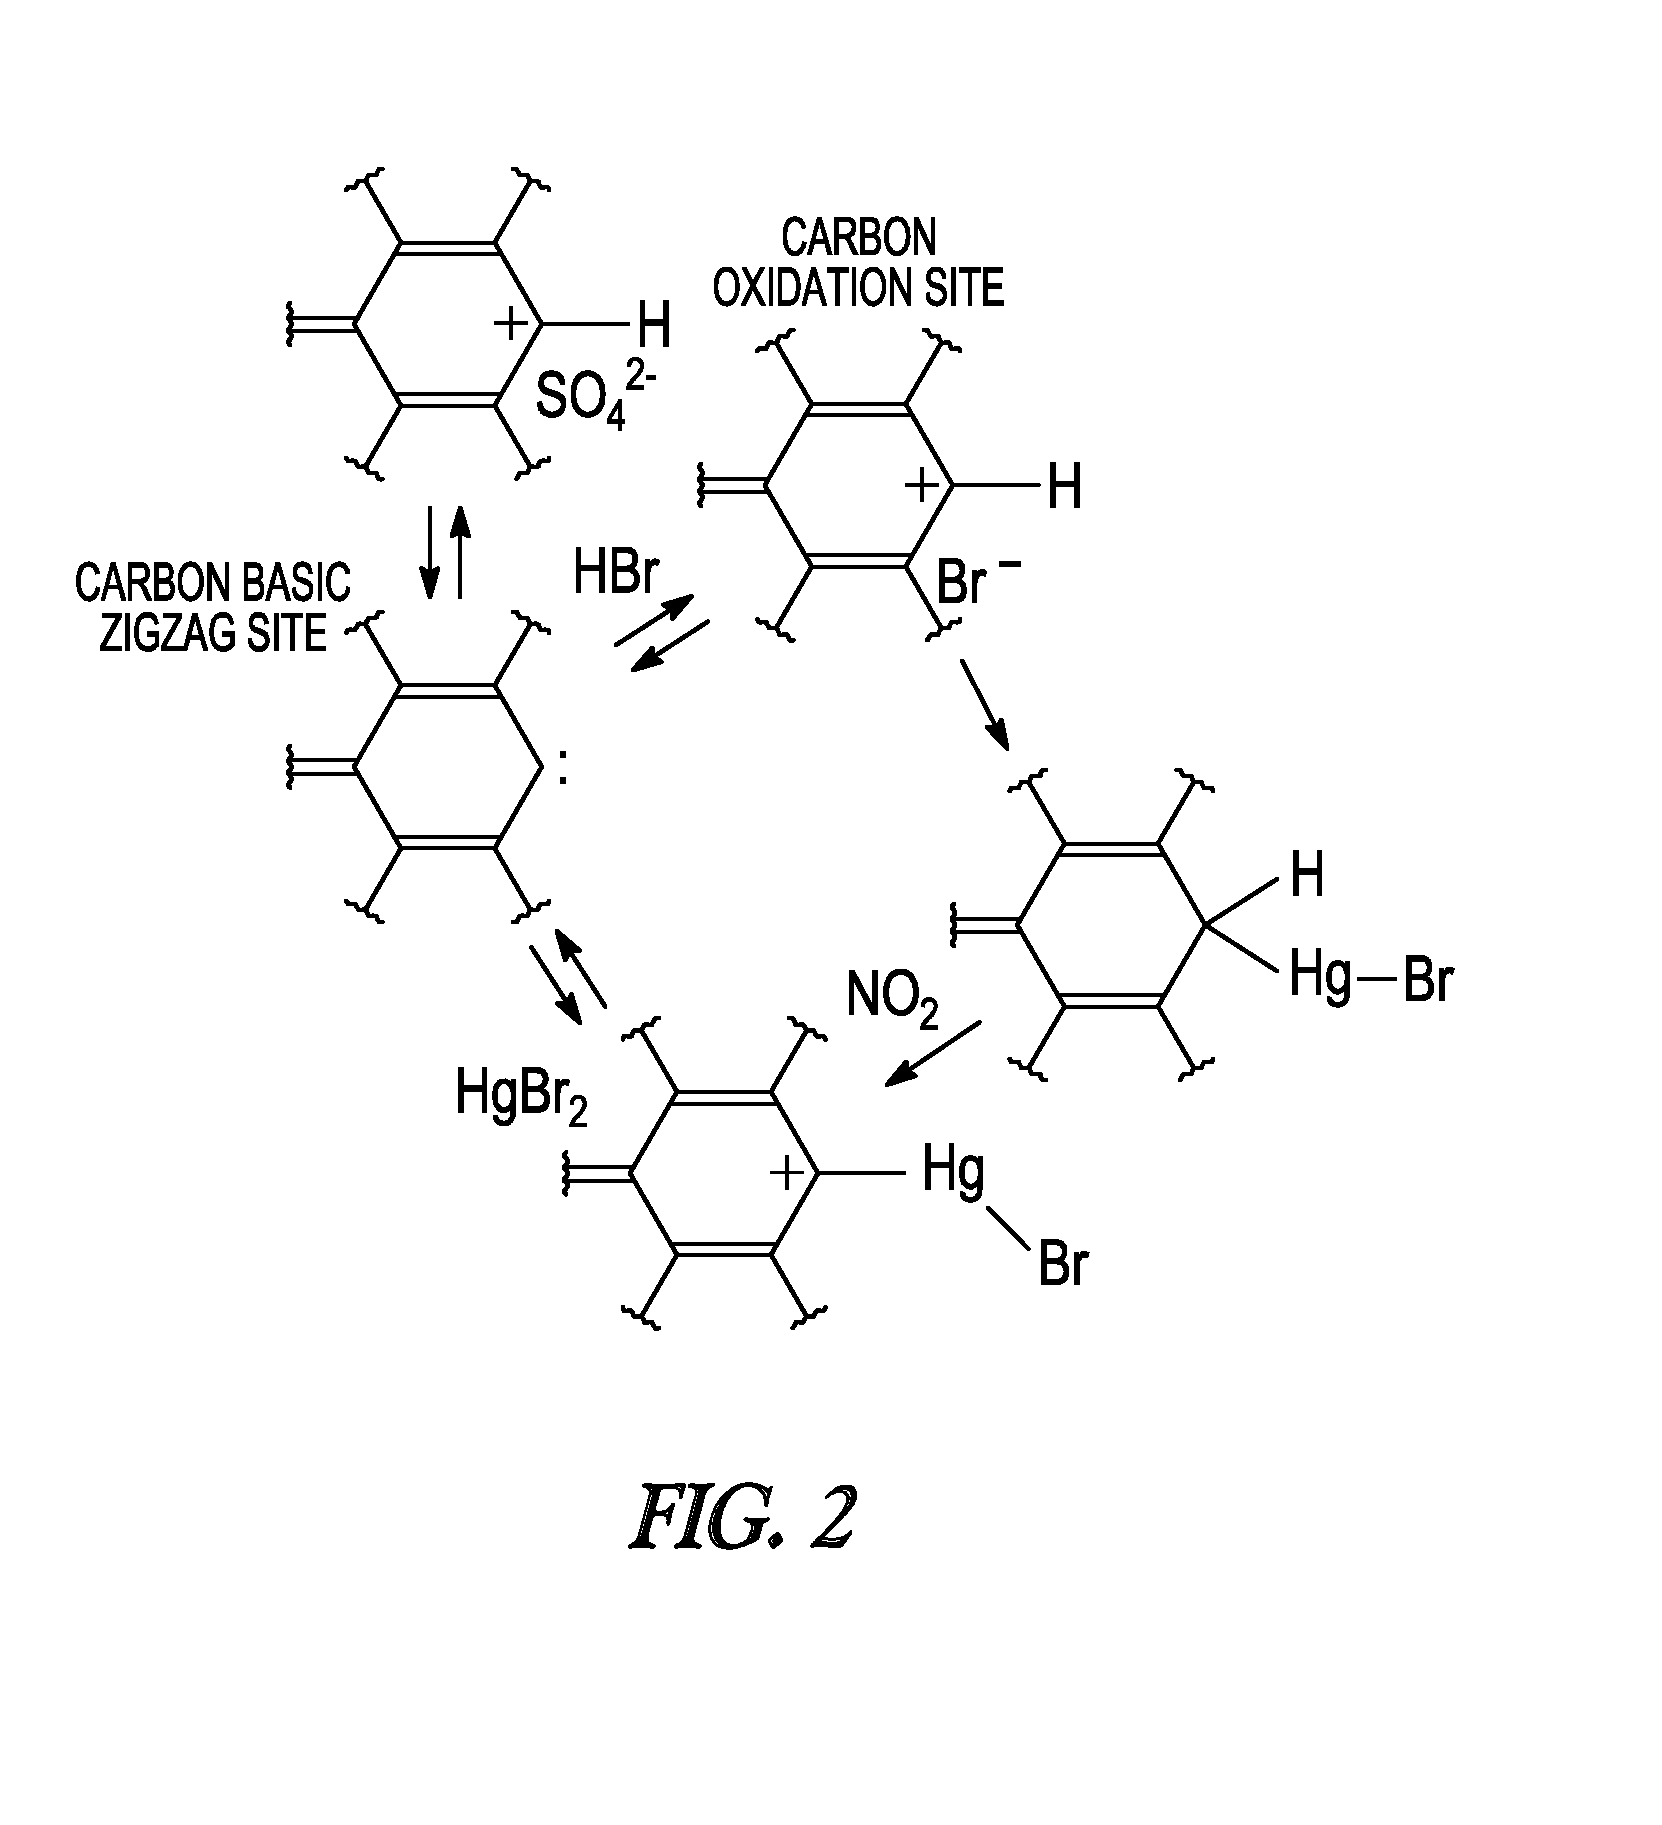 Carbon nanocomposite sorbent and methods of using the same for separation of one or more materials from a gas stream